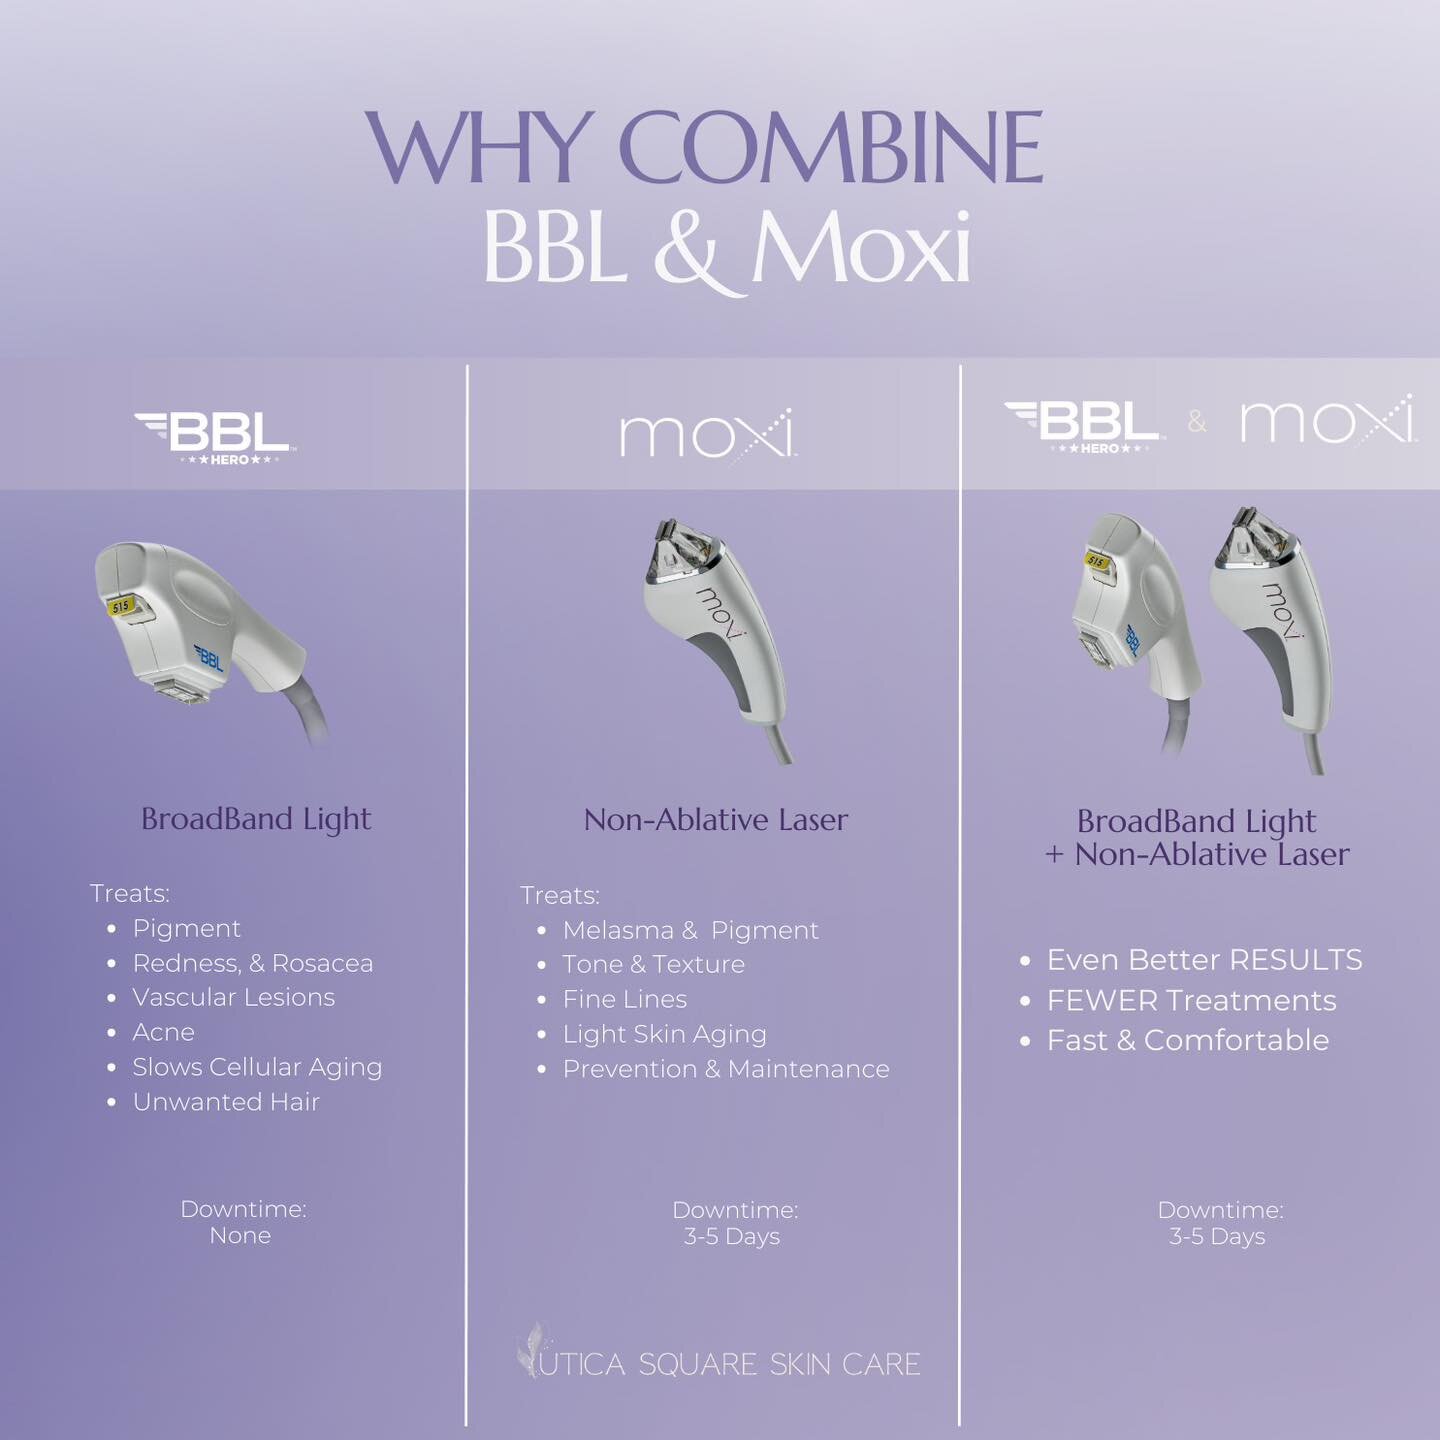 The ultimate combo
BBL and Moxi 🫶🏻
Why layer them together?
The Moxi enhances the texture and surface of your skin and BBL evens out discoloration and promotes skin cells to a younger state.

Combine, Conquer, and Correct!

#moxiBBl #moxi #scitonbb